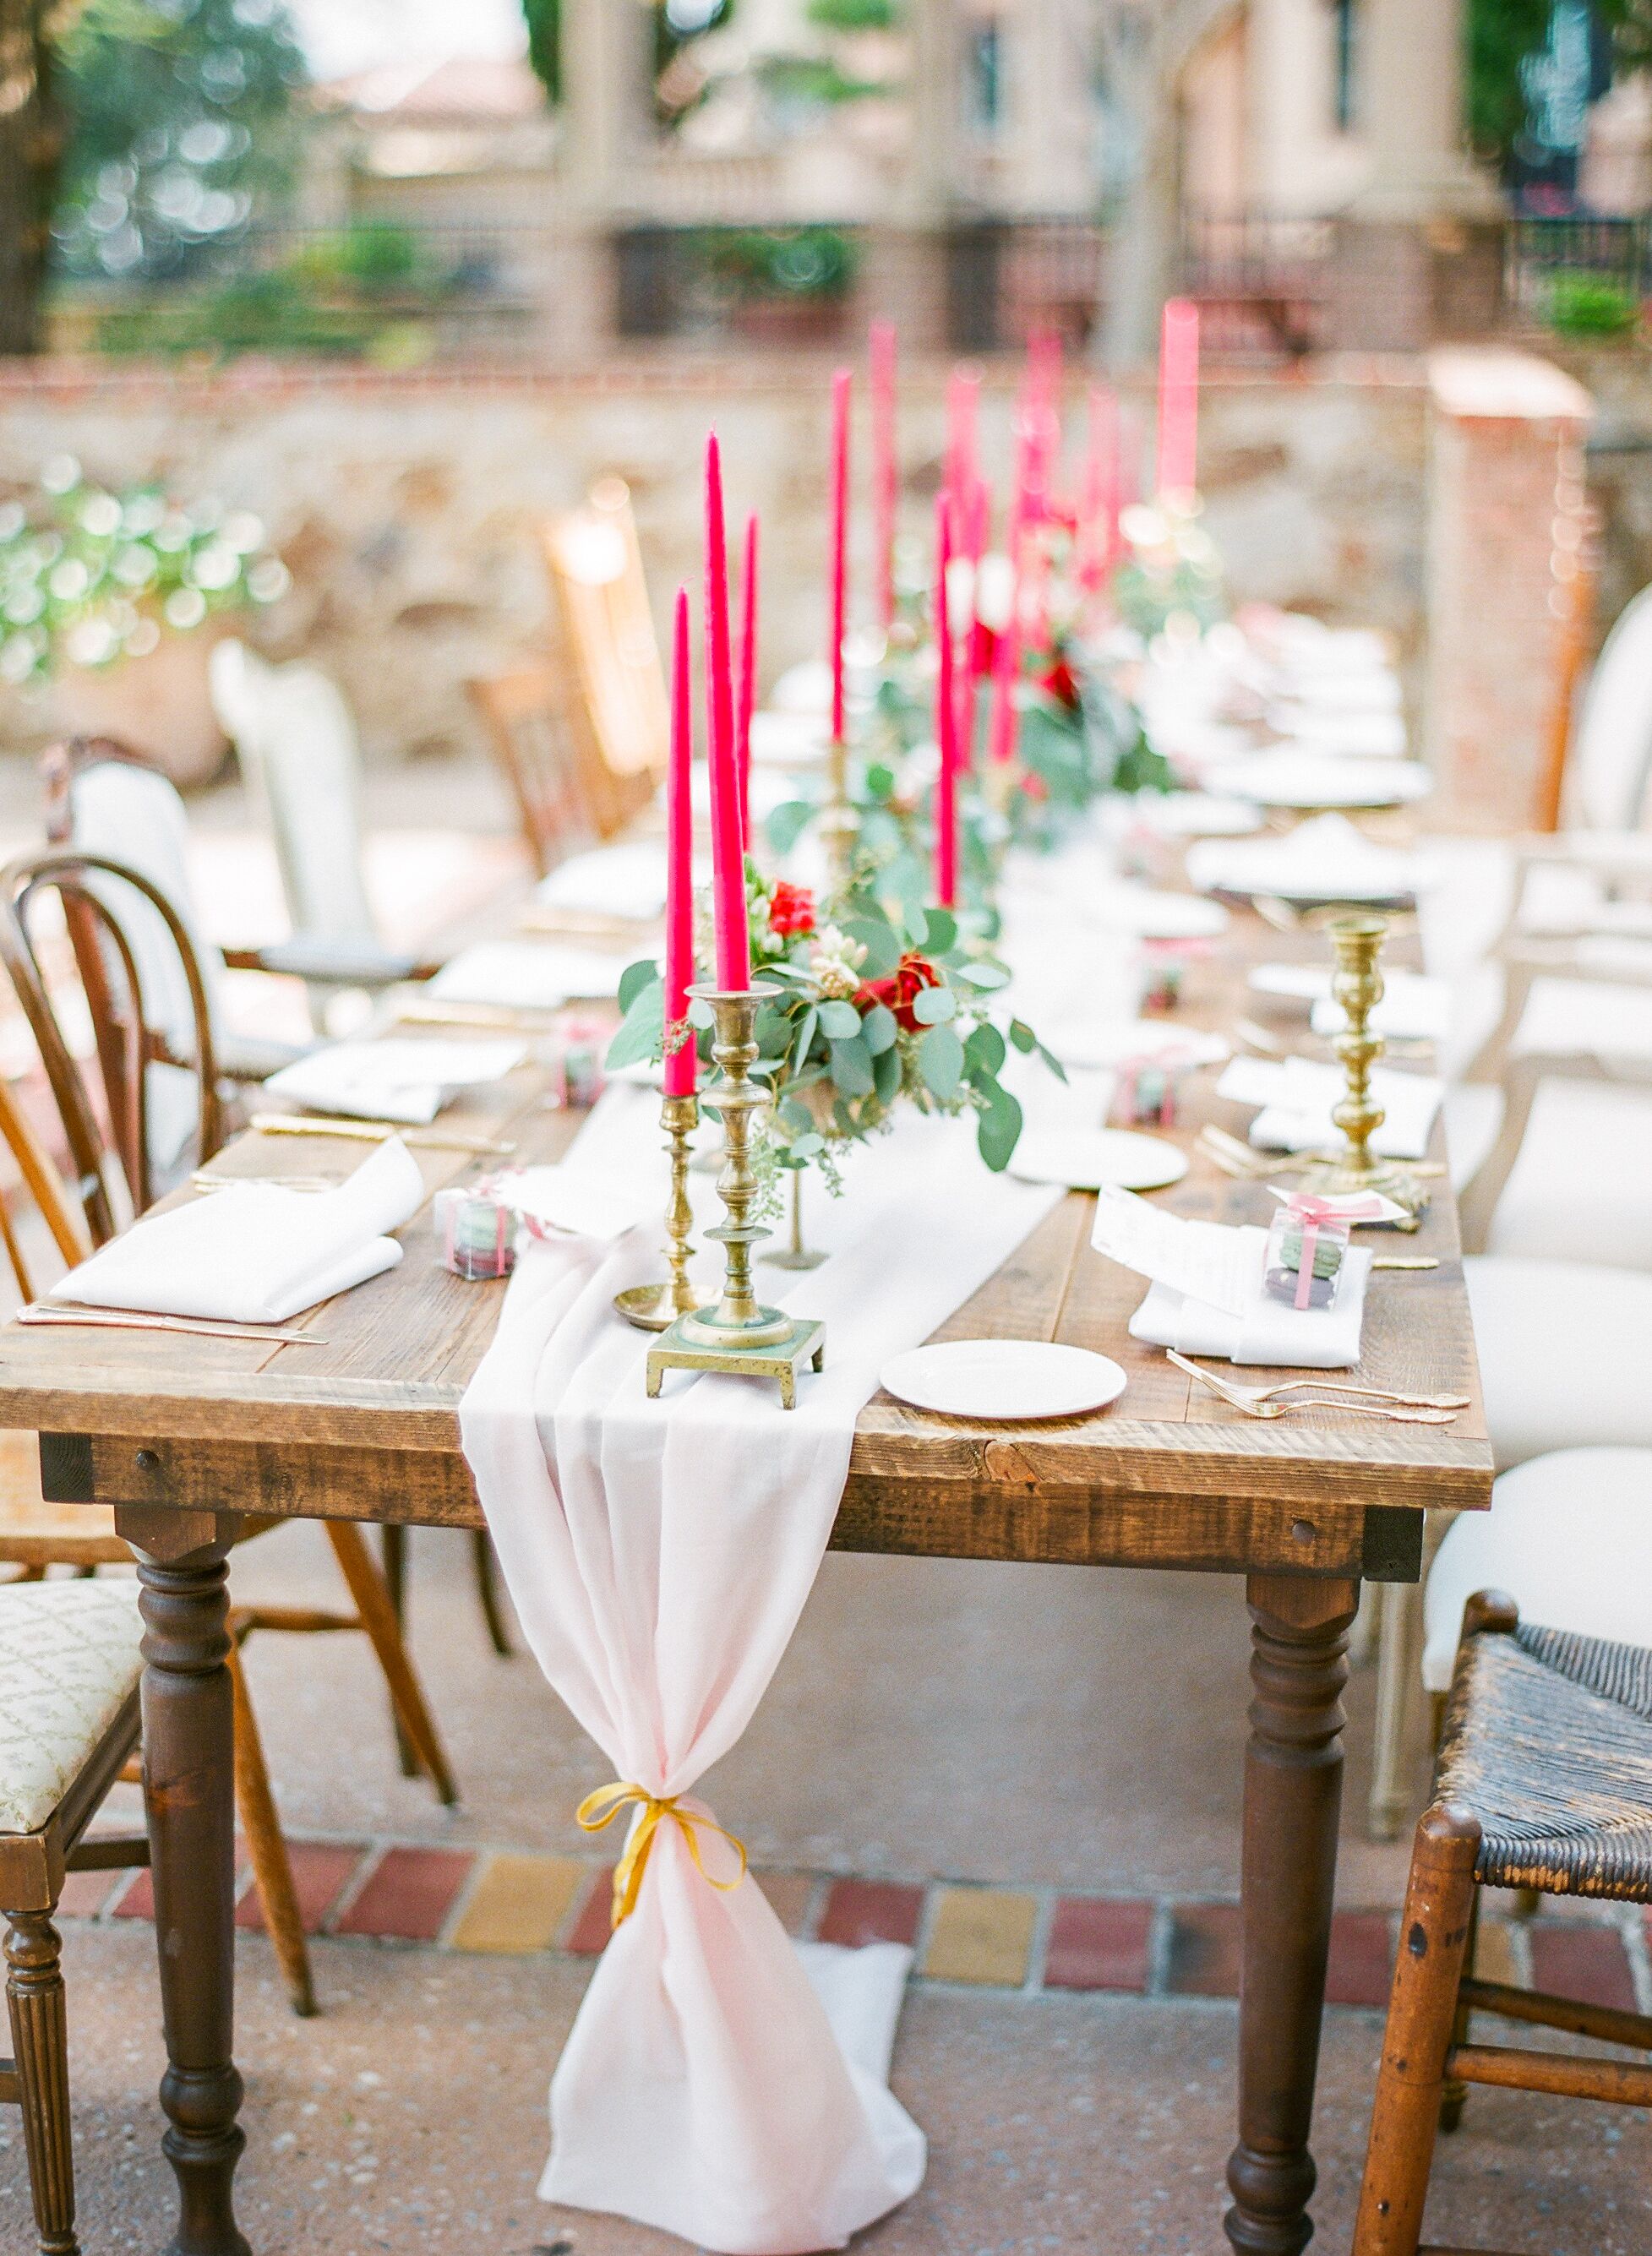 Blush Chiffon Table Runner with Cranberry Candlesticks